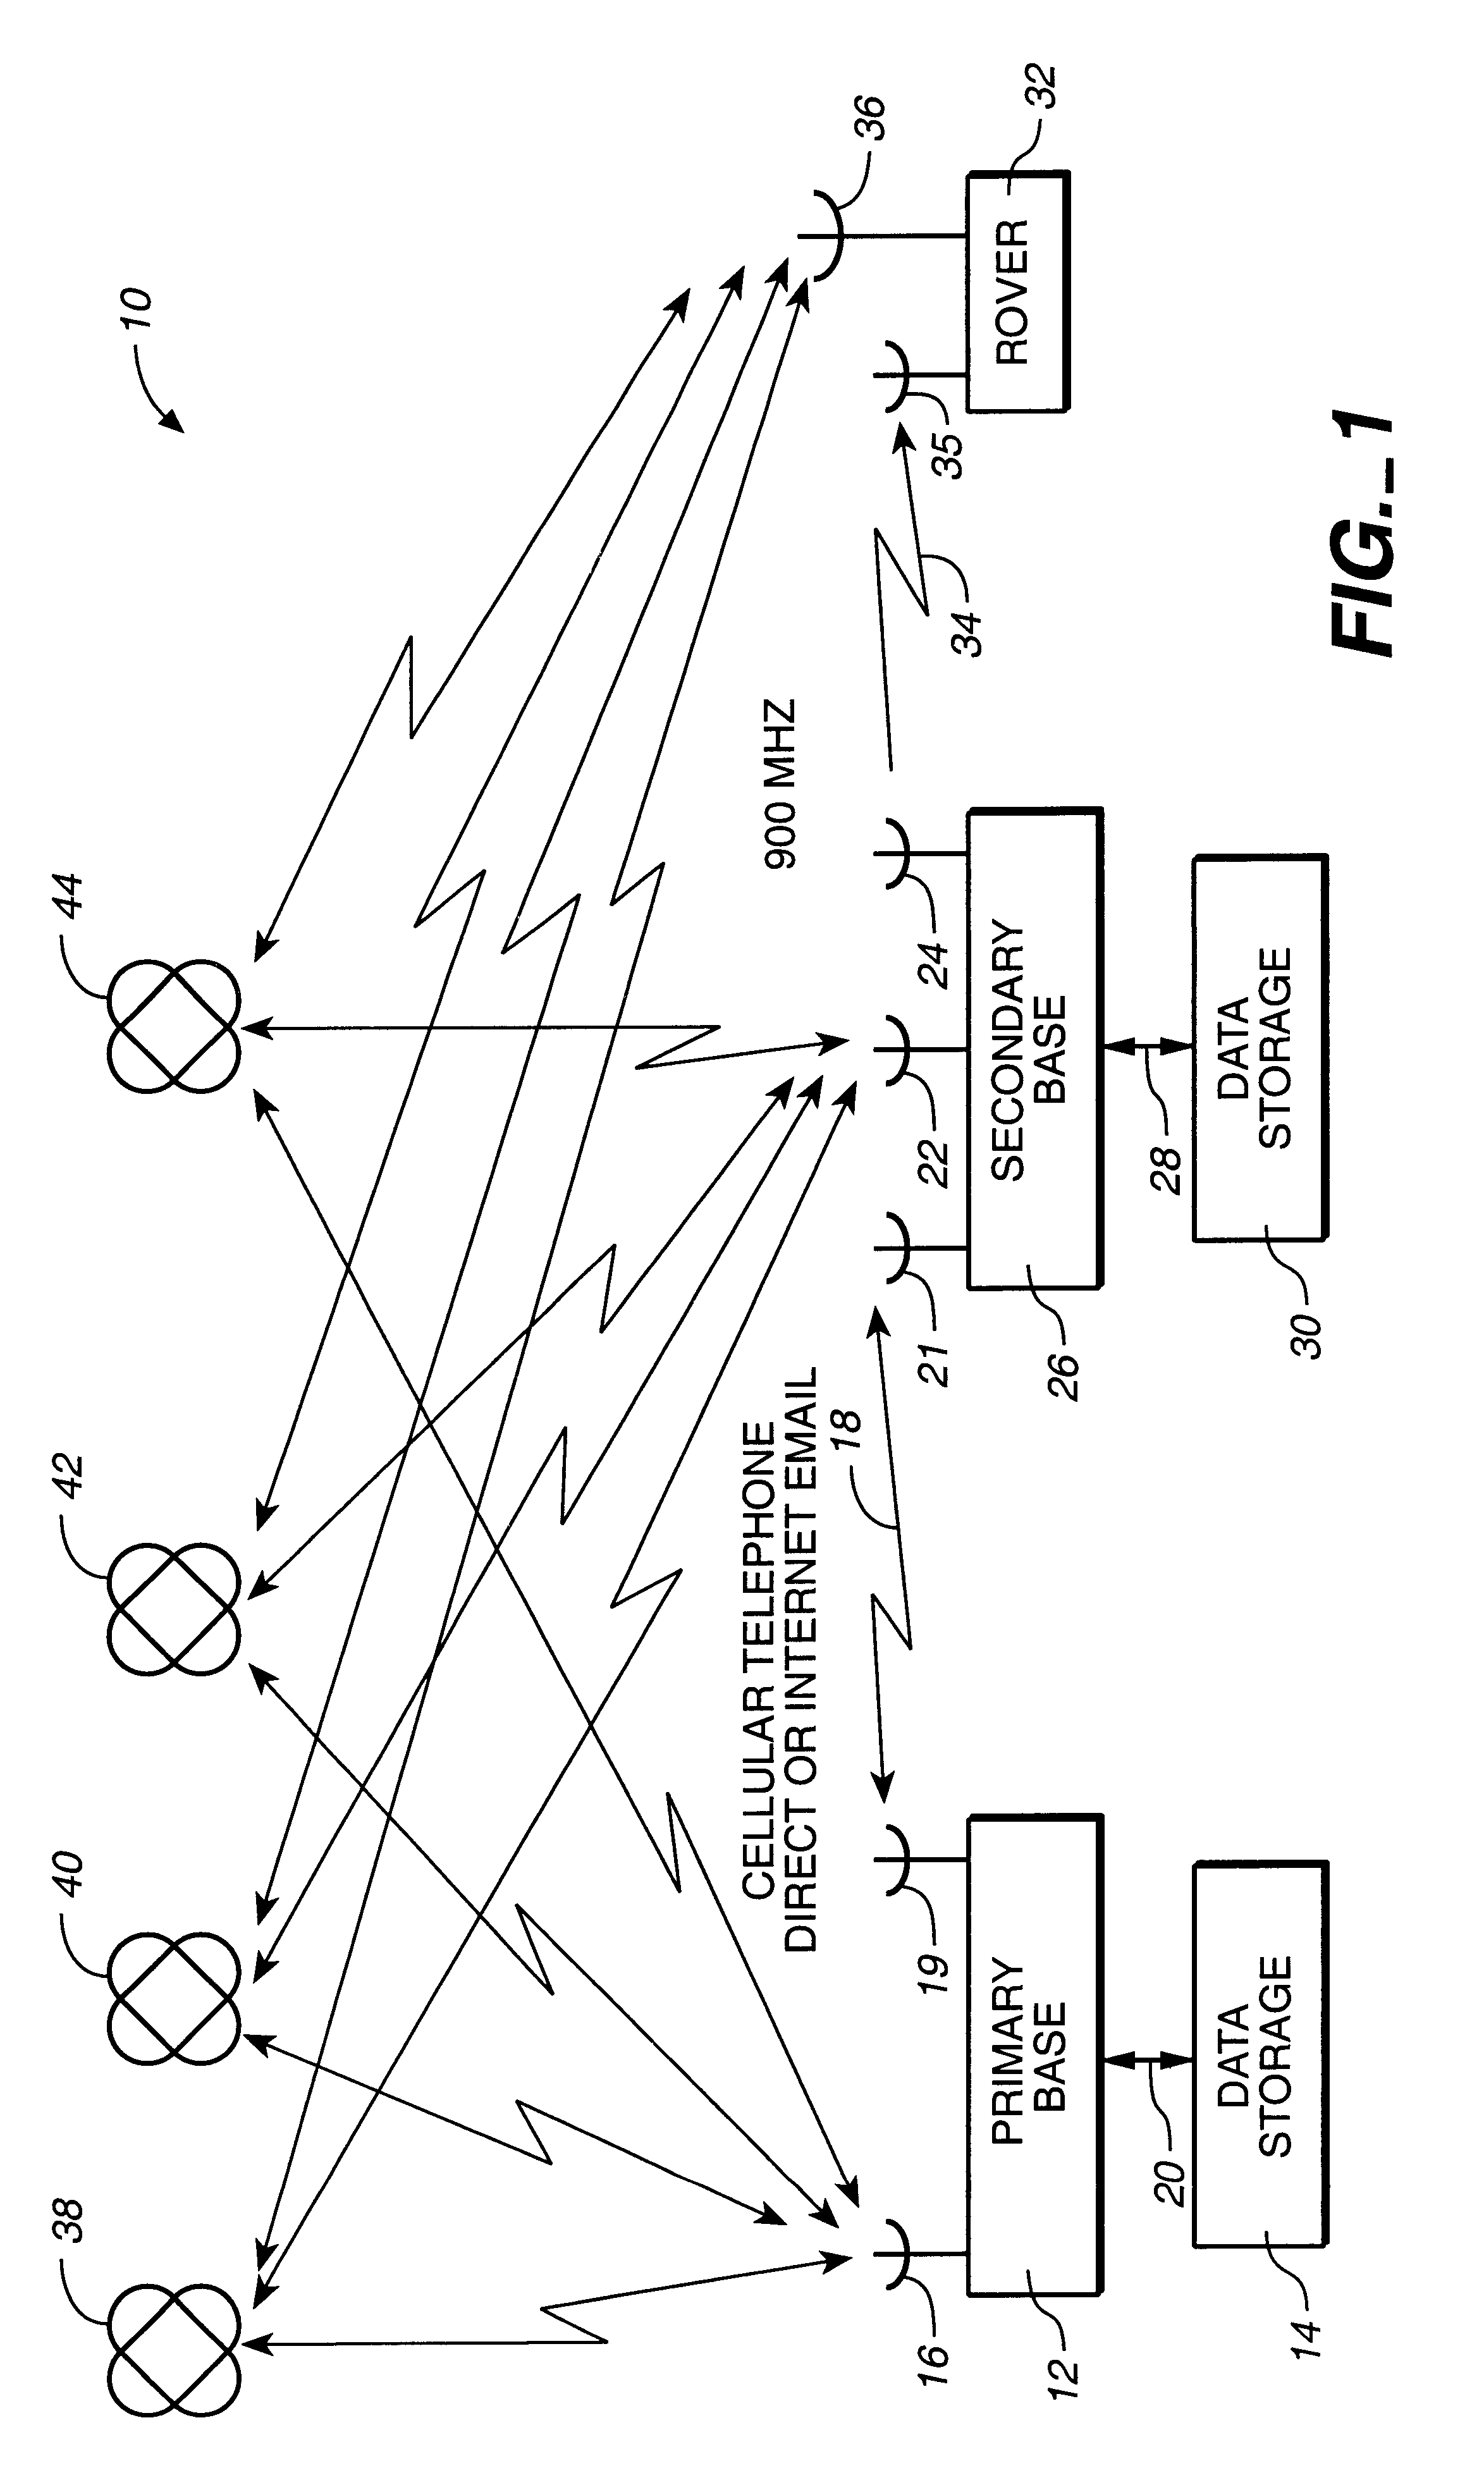 Long baseline RTK using a secondary base receiver a non-continuous data link and a wireless internet connectivity